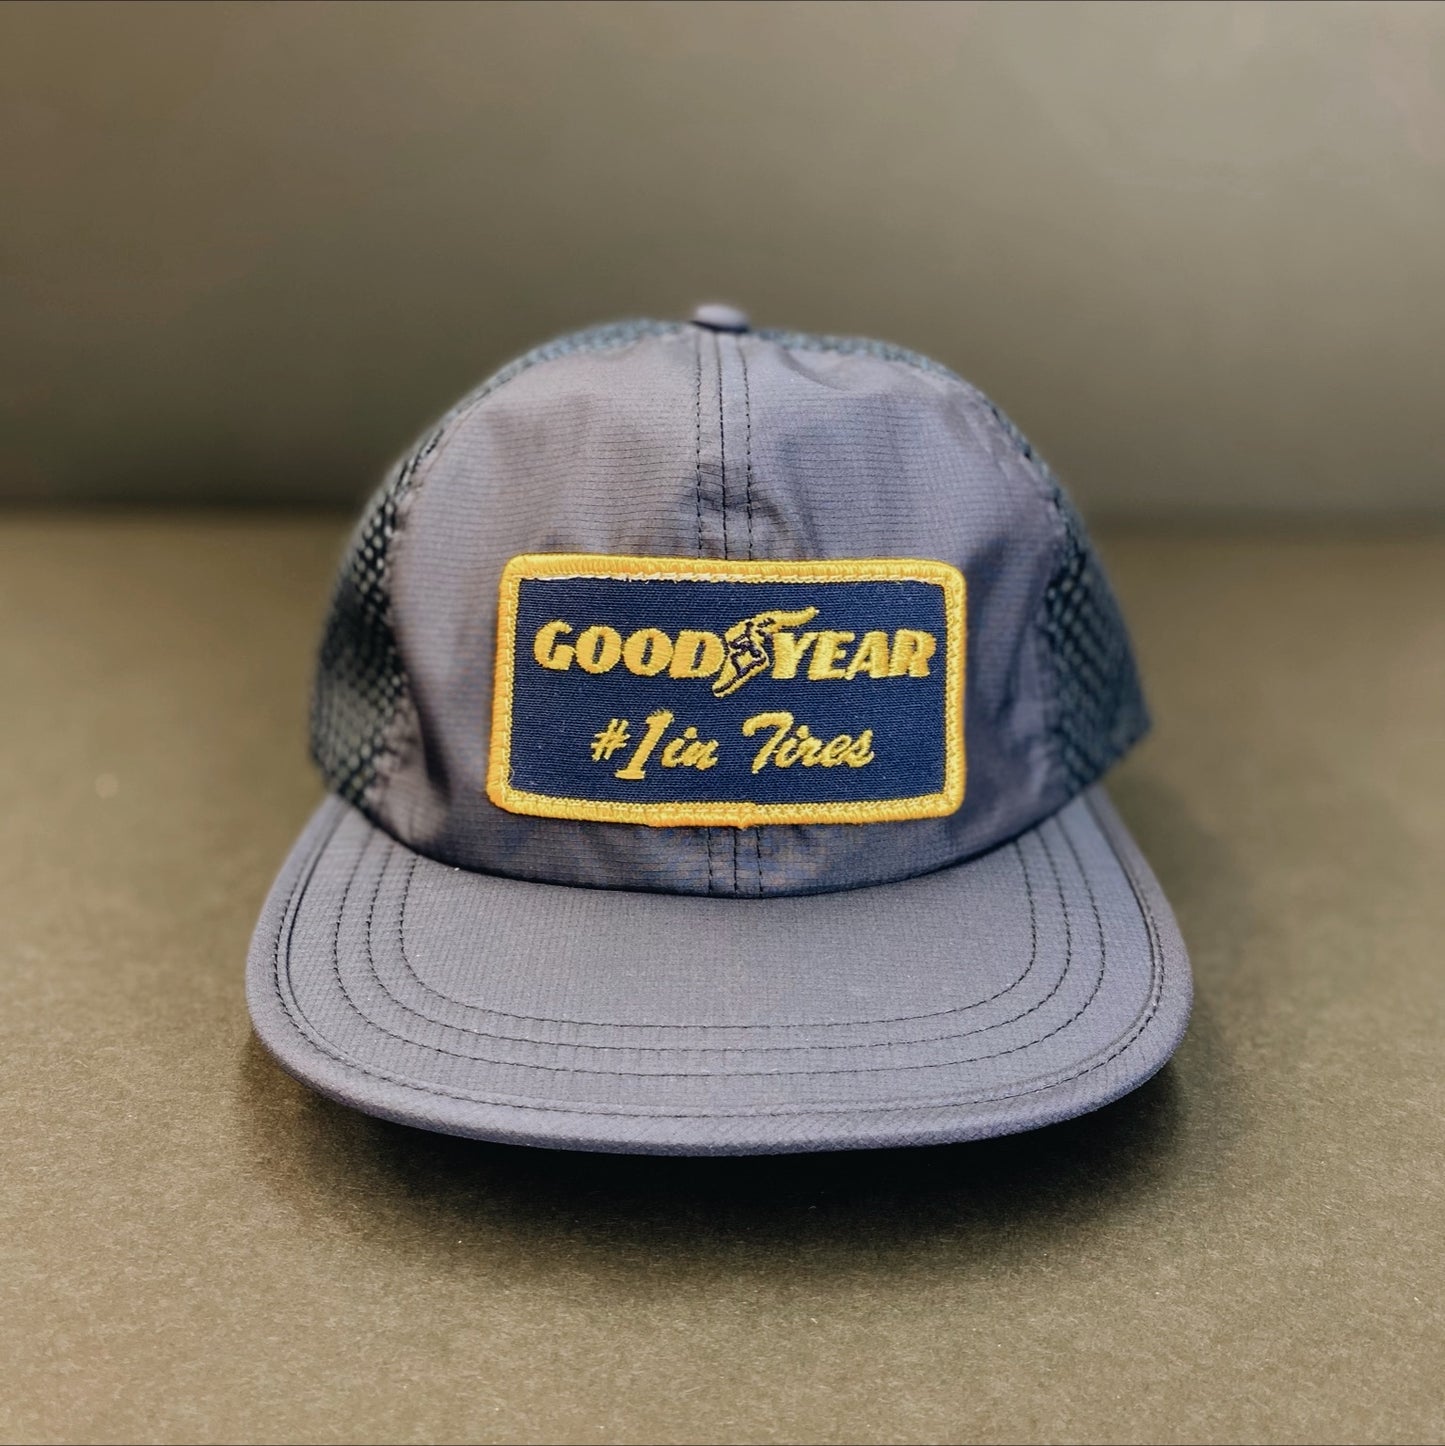 Goodyear #1 in Tires Hat